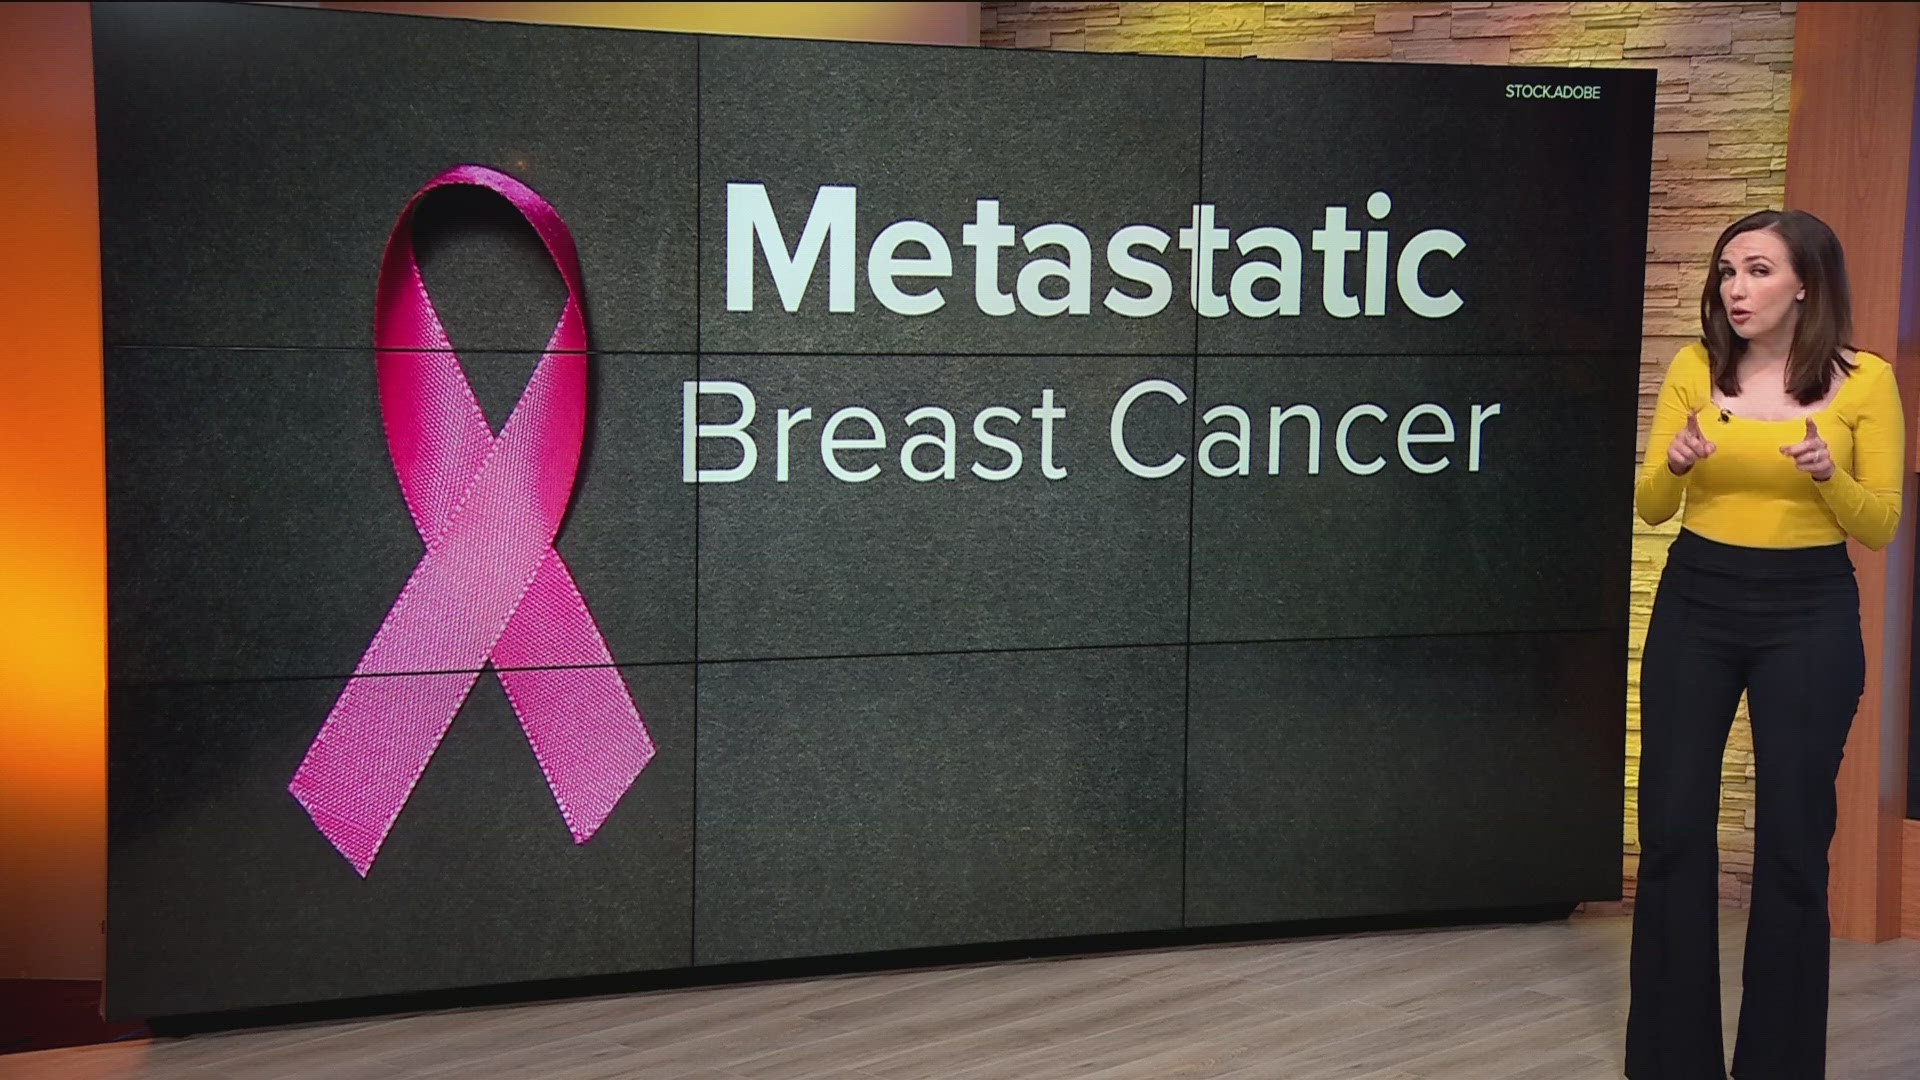 Metastatic breast cancer, Stage IV breast cancer, is known as the only deadly type of the disease.